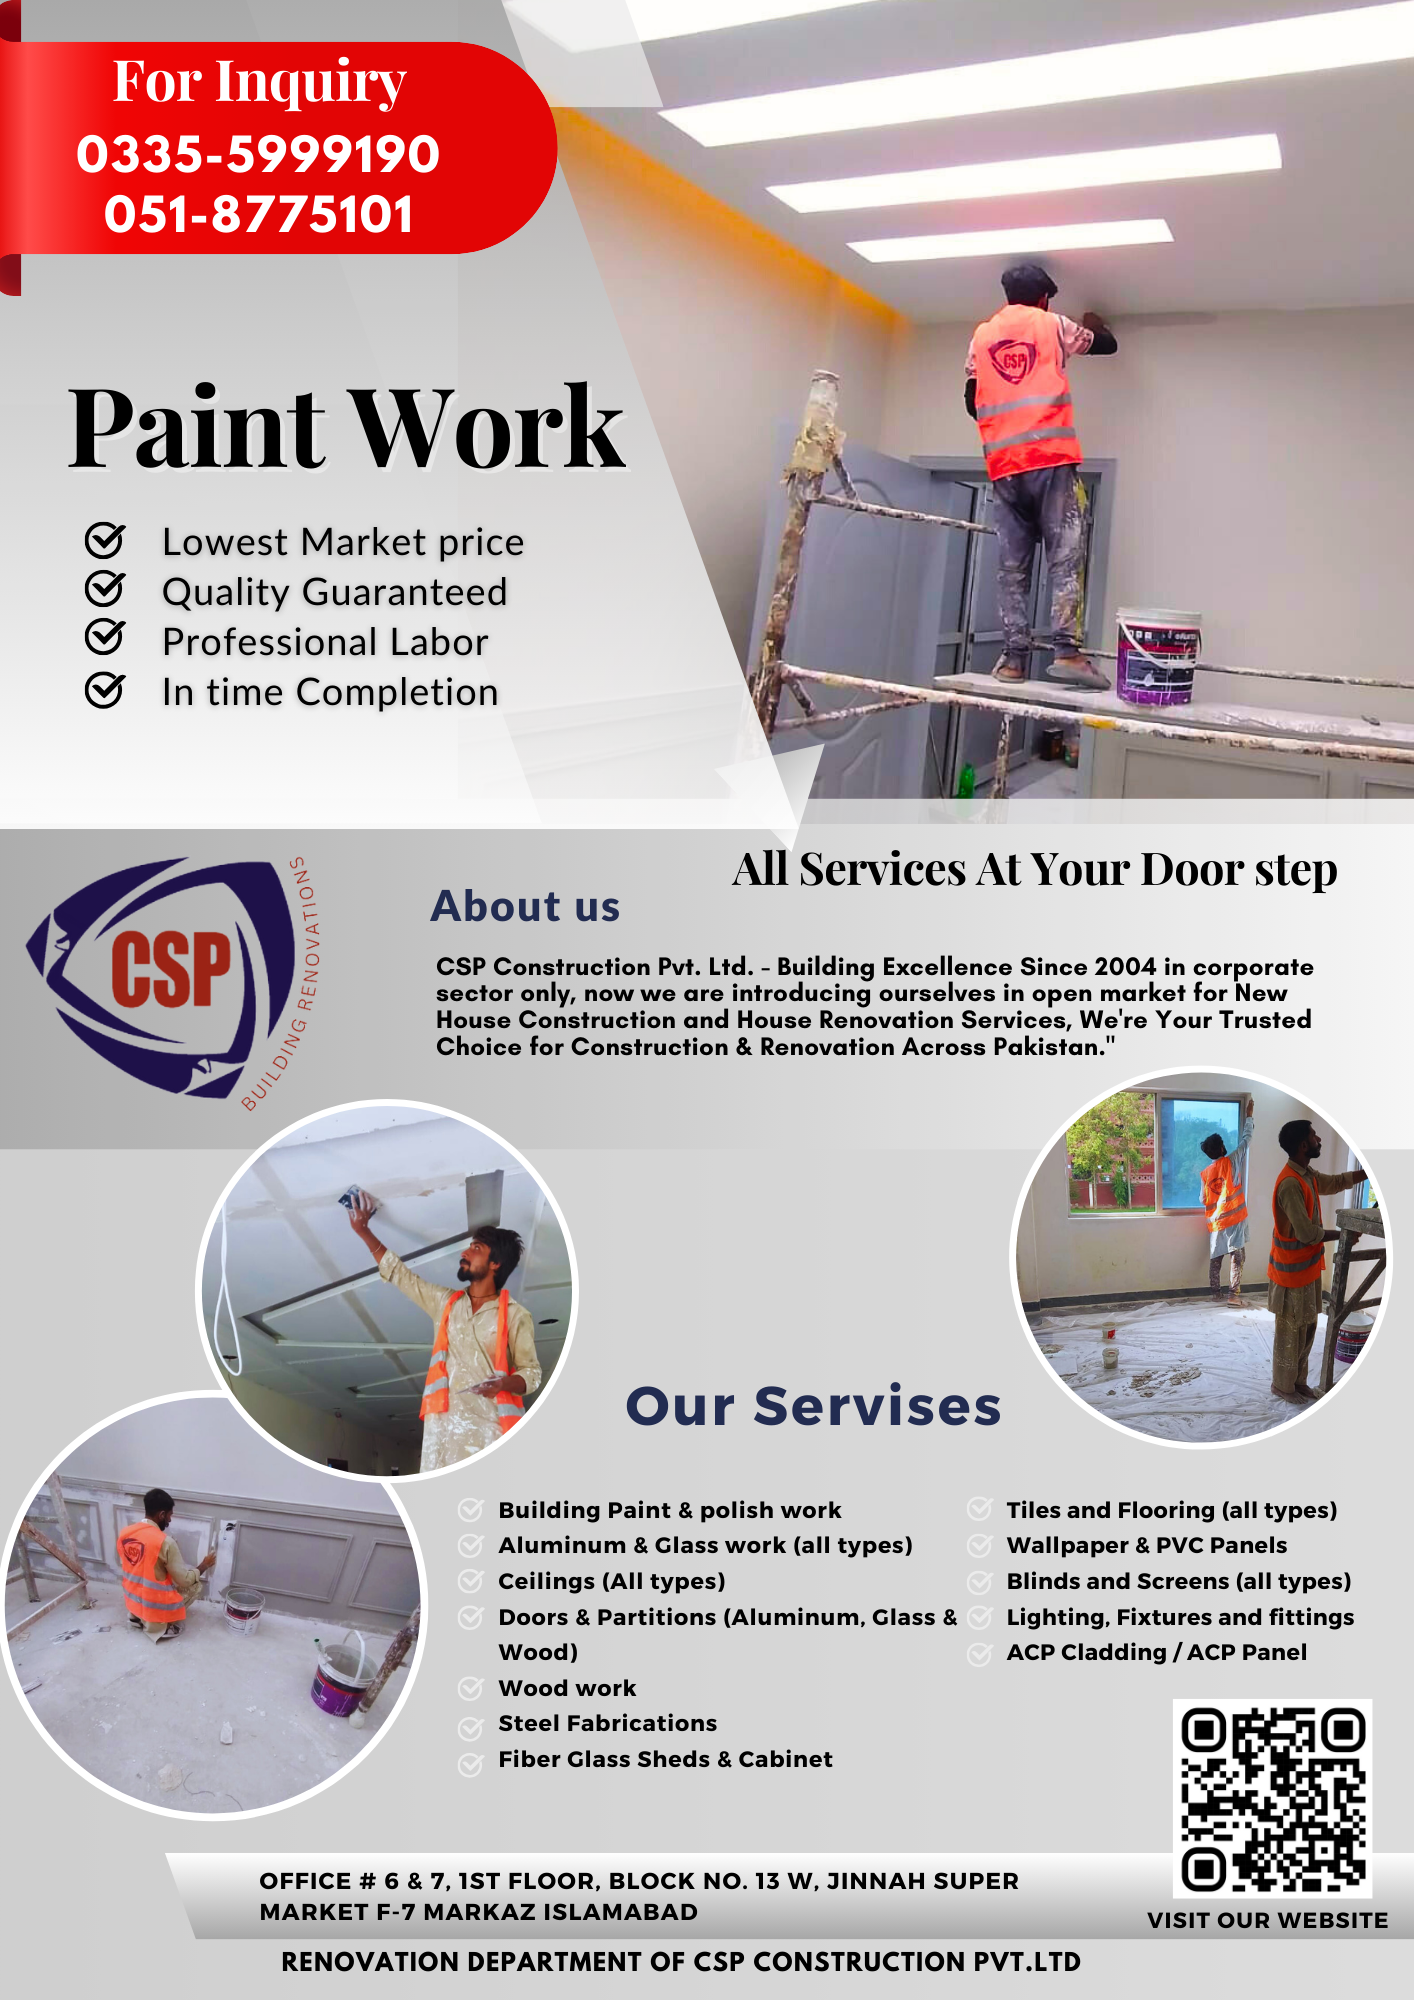 images/services/Paint_work.png